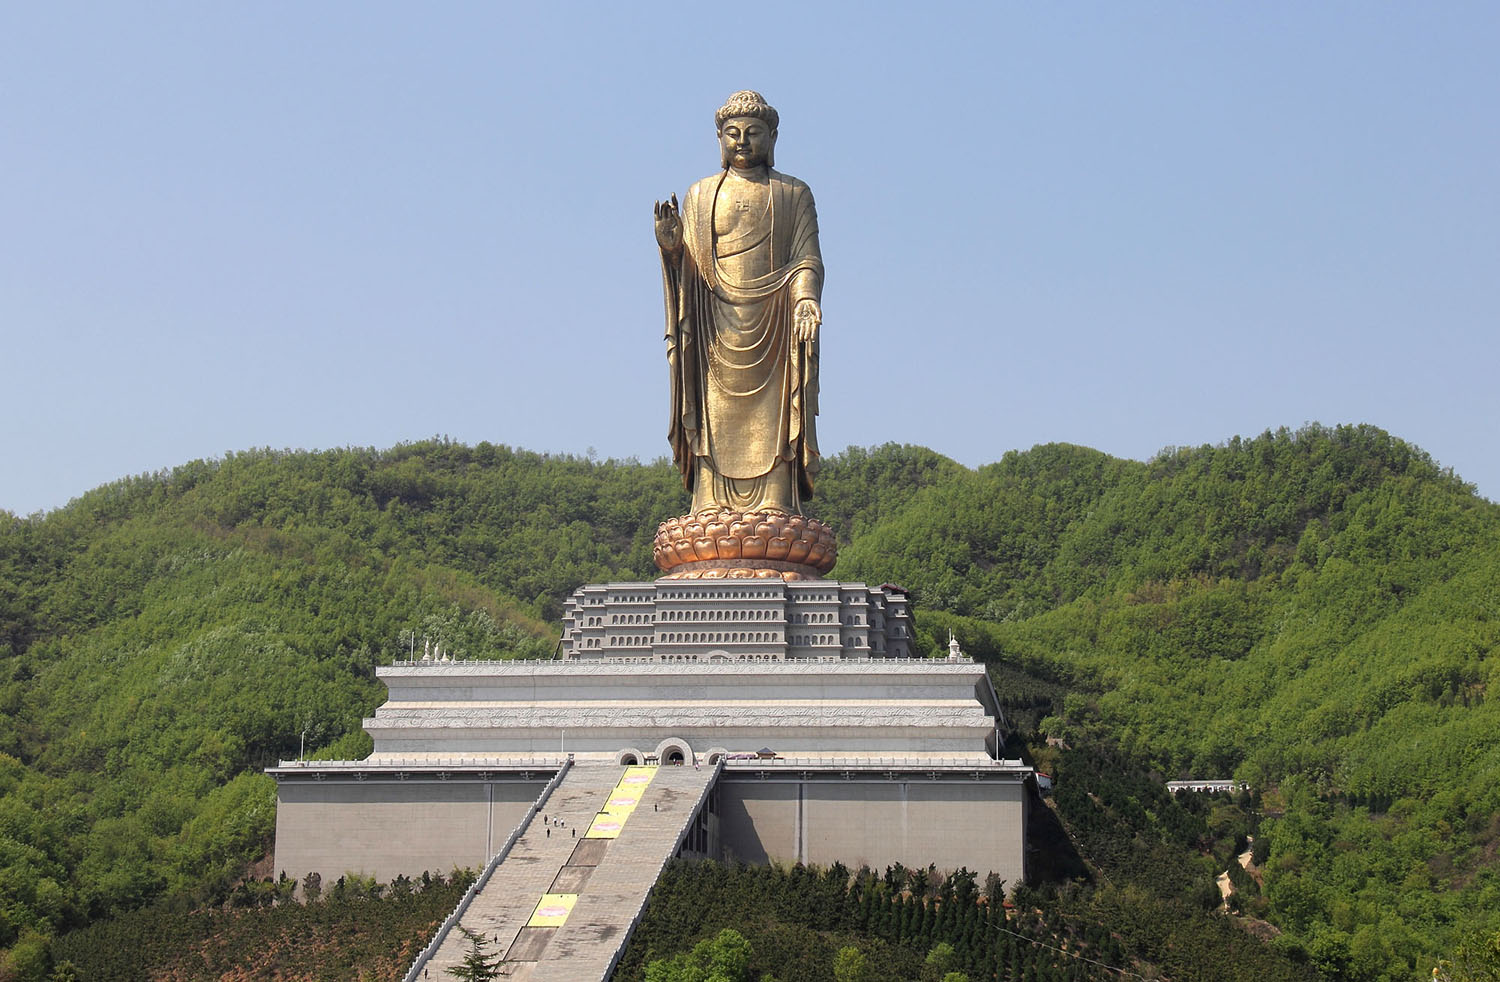 List of top 10 tallest statues in the world